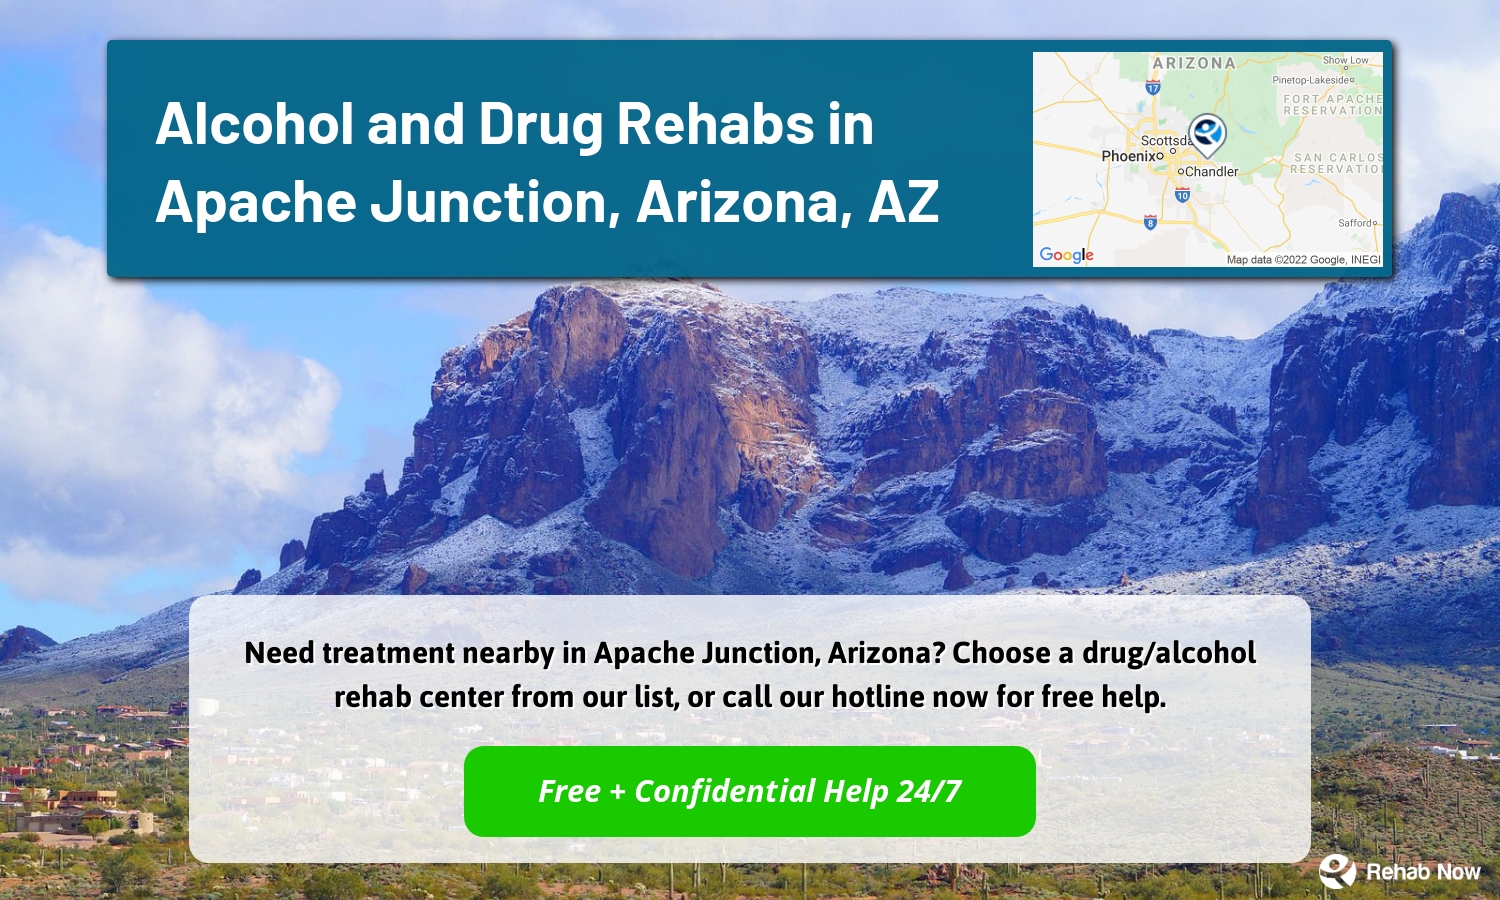 Need treatment nearby in Apache Junction, Arizona? Choose a drug/alcohol rehab center from our list, or call our hotline now for free help.